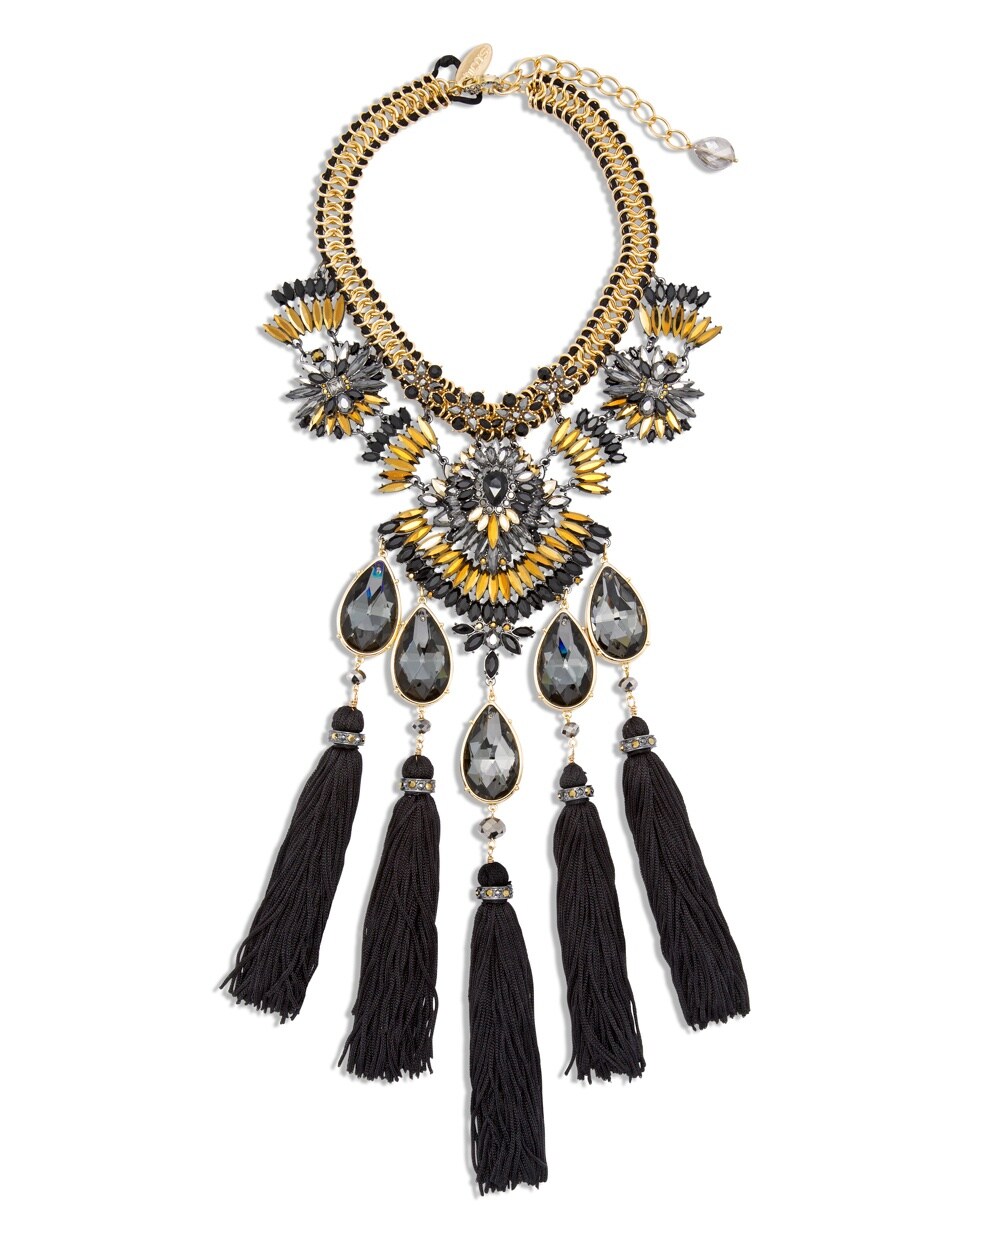 The Collectibles Versailles Necklace